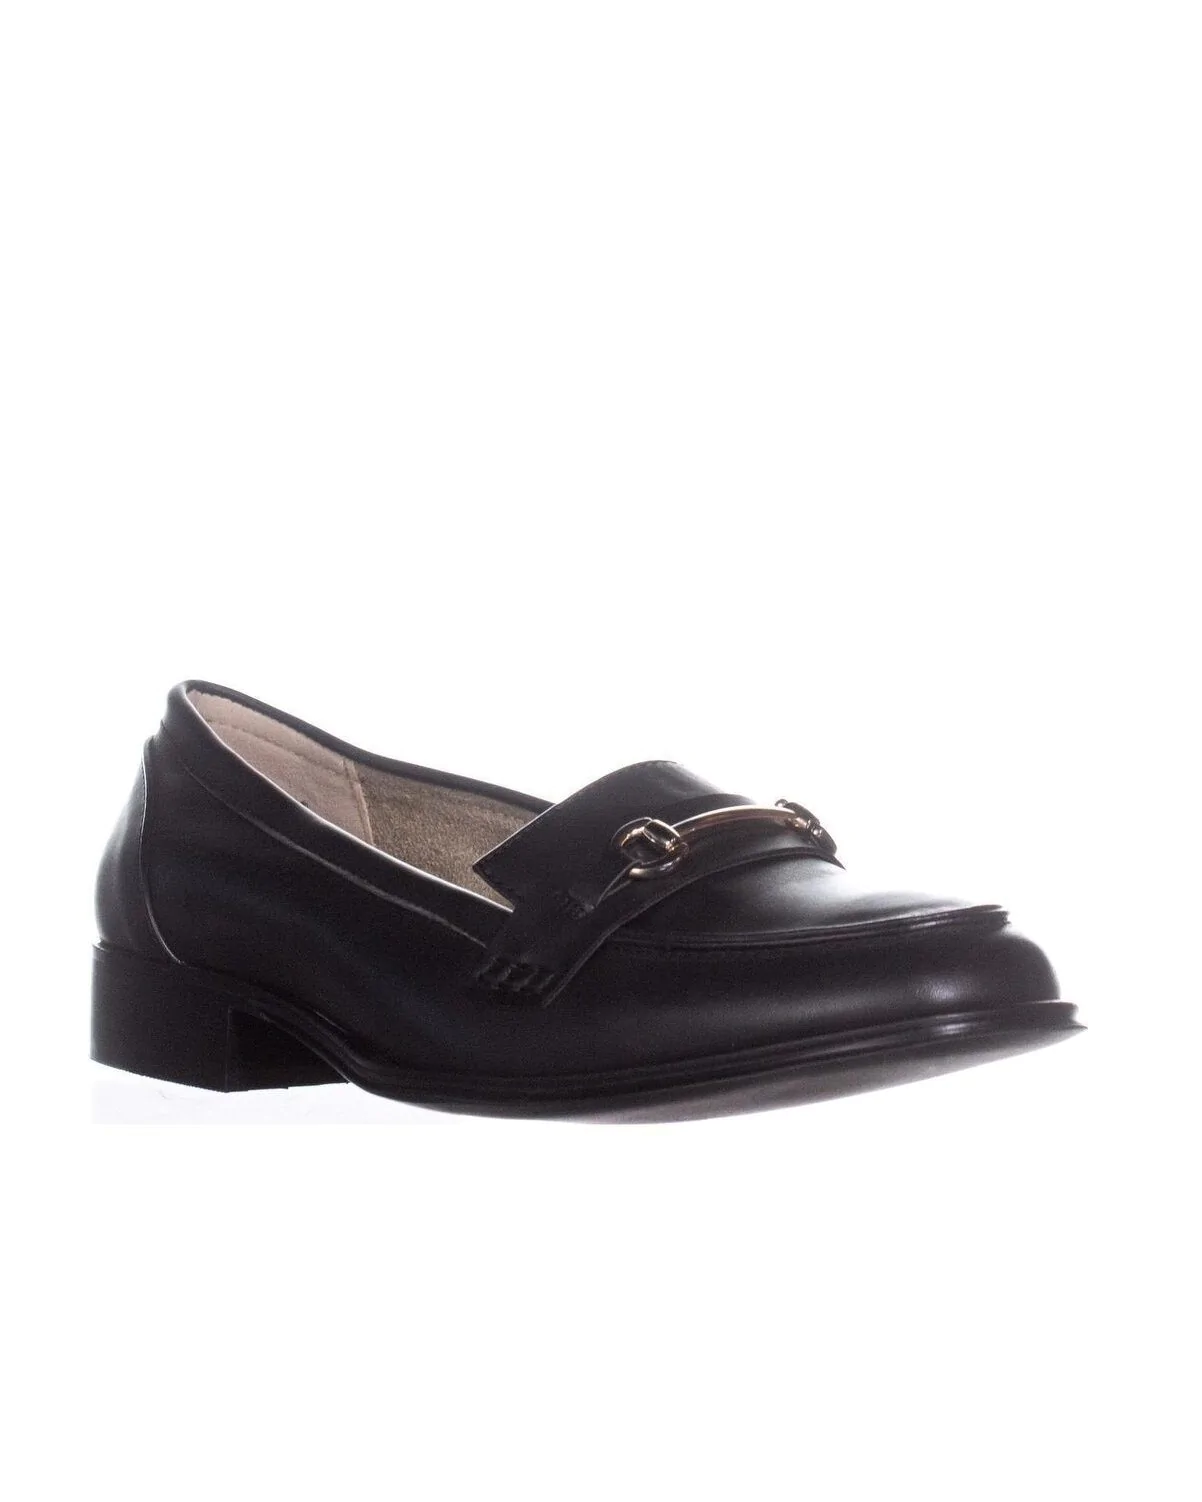 Wanted Cititime Loafers